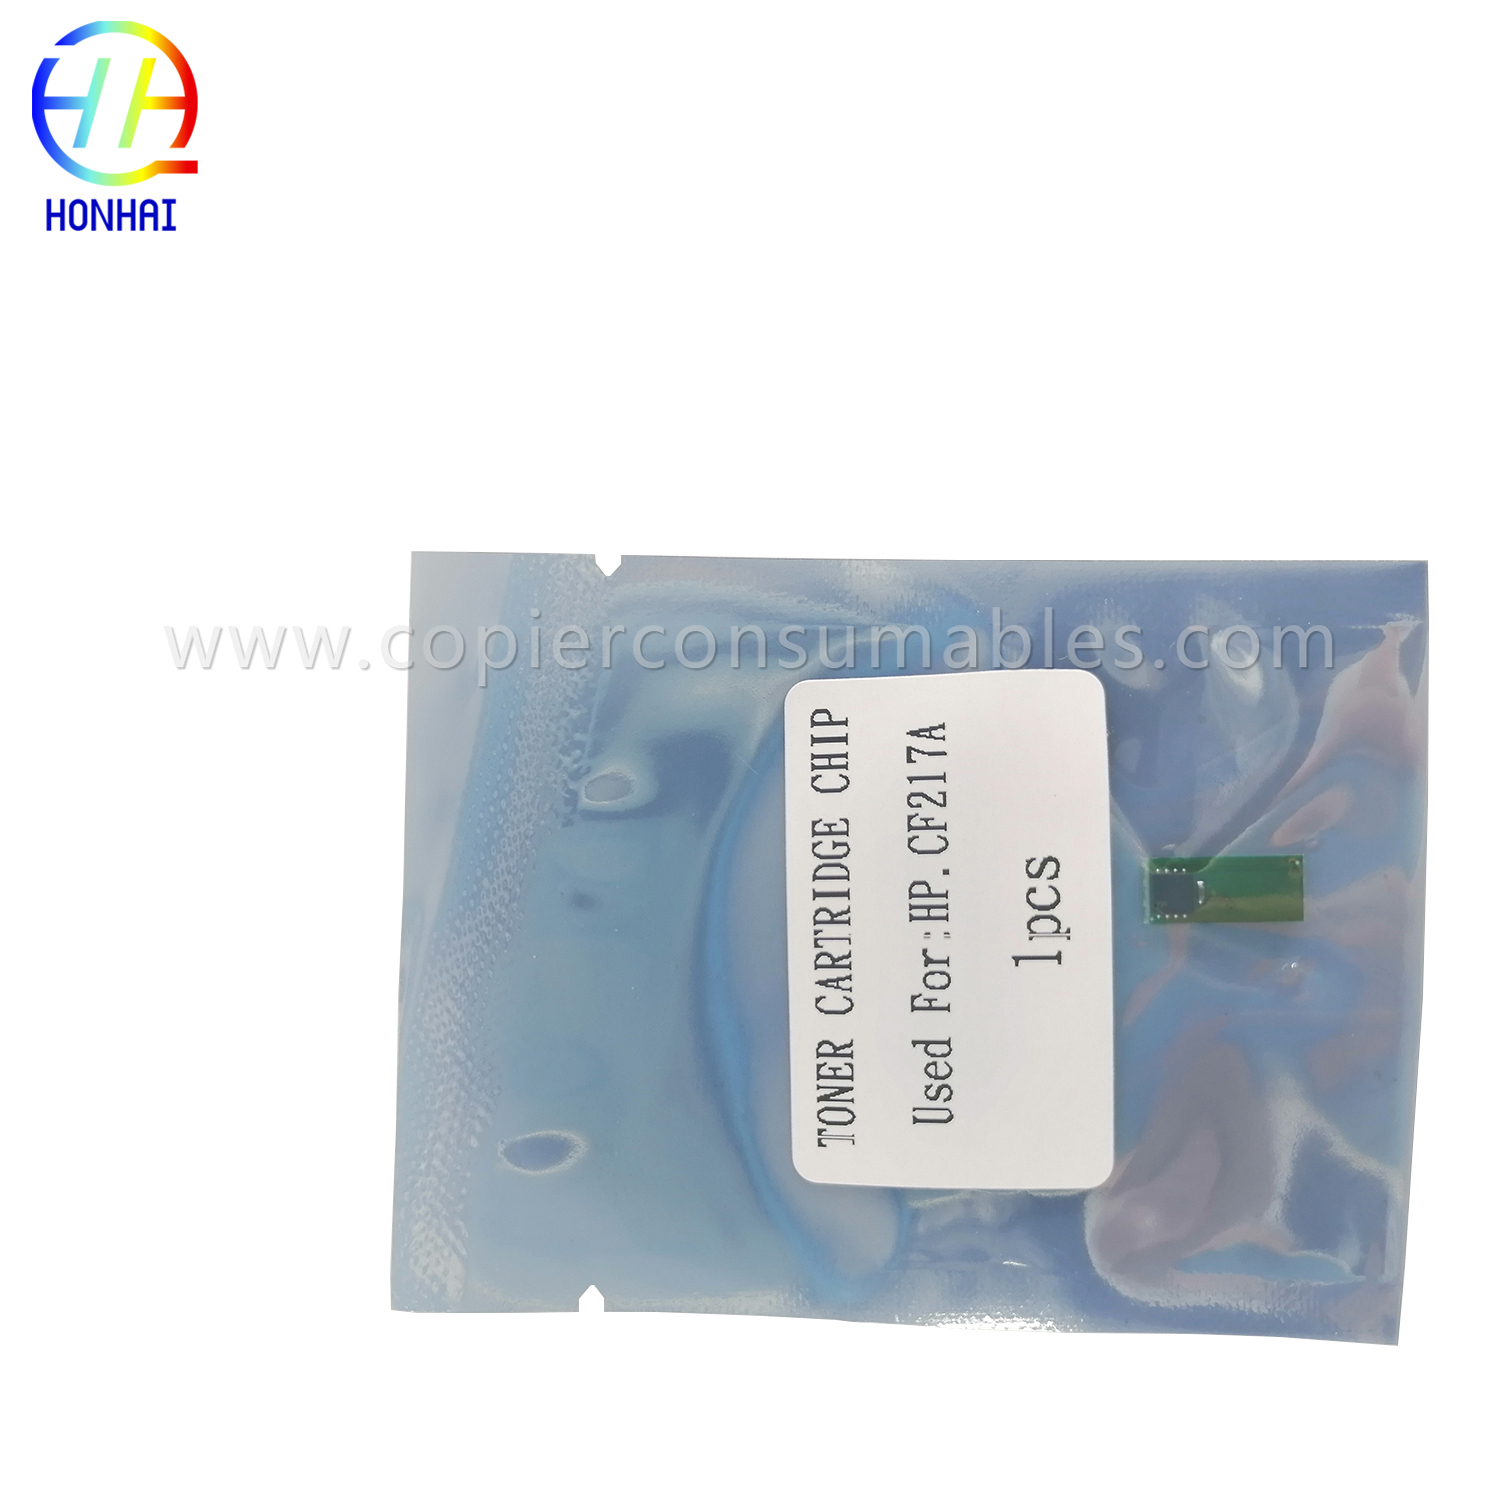 Toner Chip for HP M102 CF217A